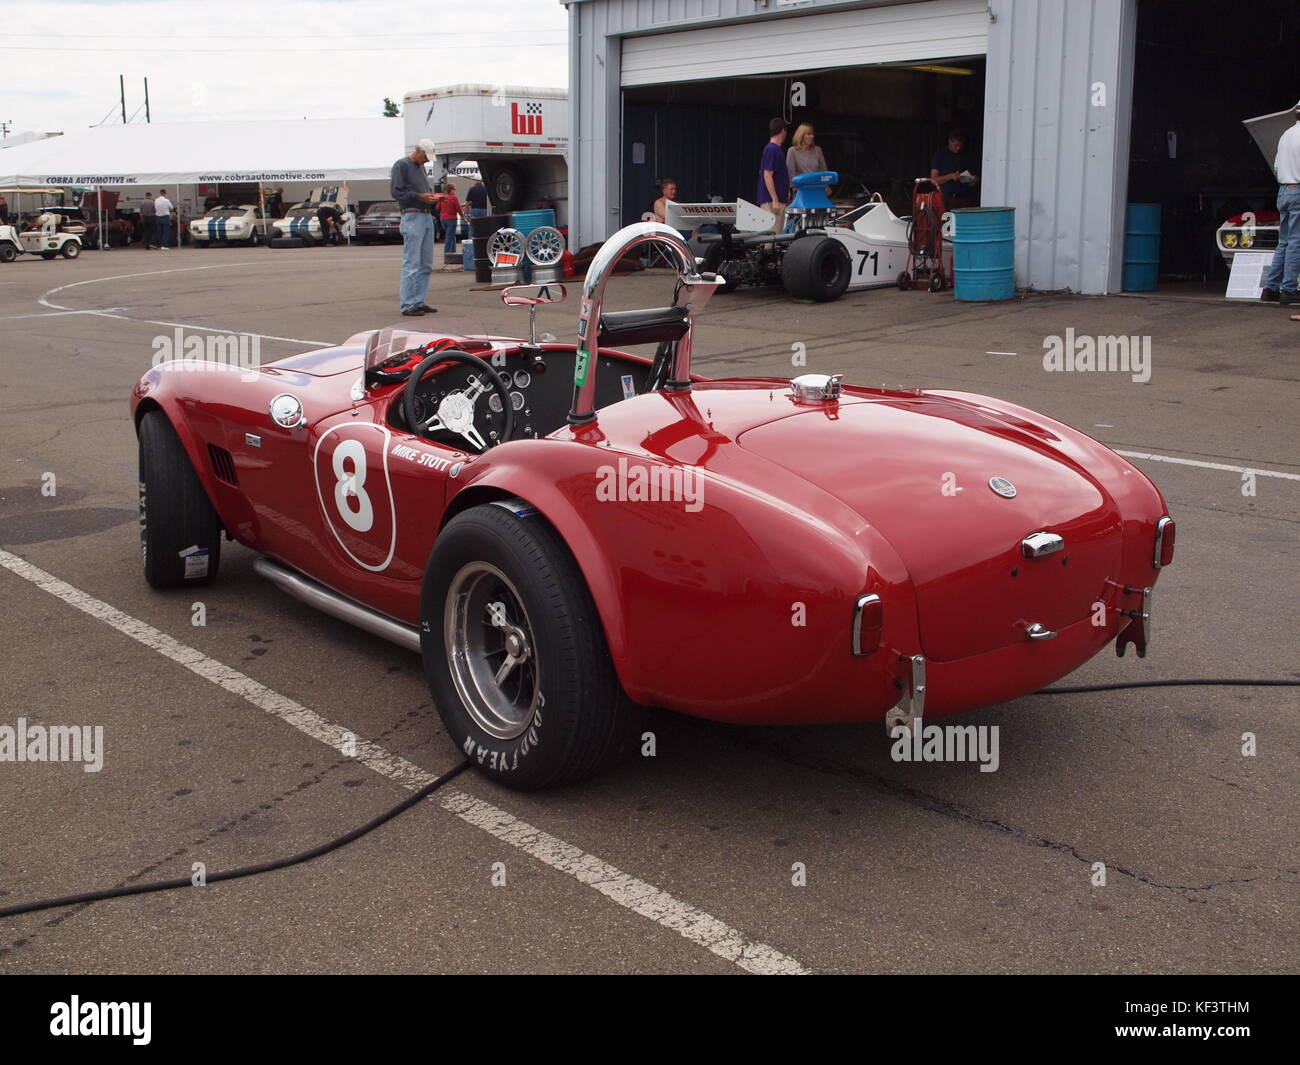 Original 1963 Shelby Cobra competition car as raced by the late Mike Stott of Ho-Ho-Kus, New Jersey. The car, auctioned recently for over $1million. Stock Photo